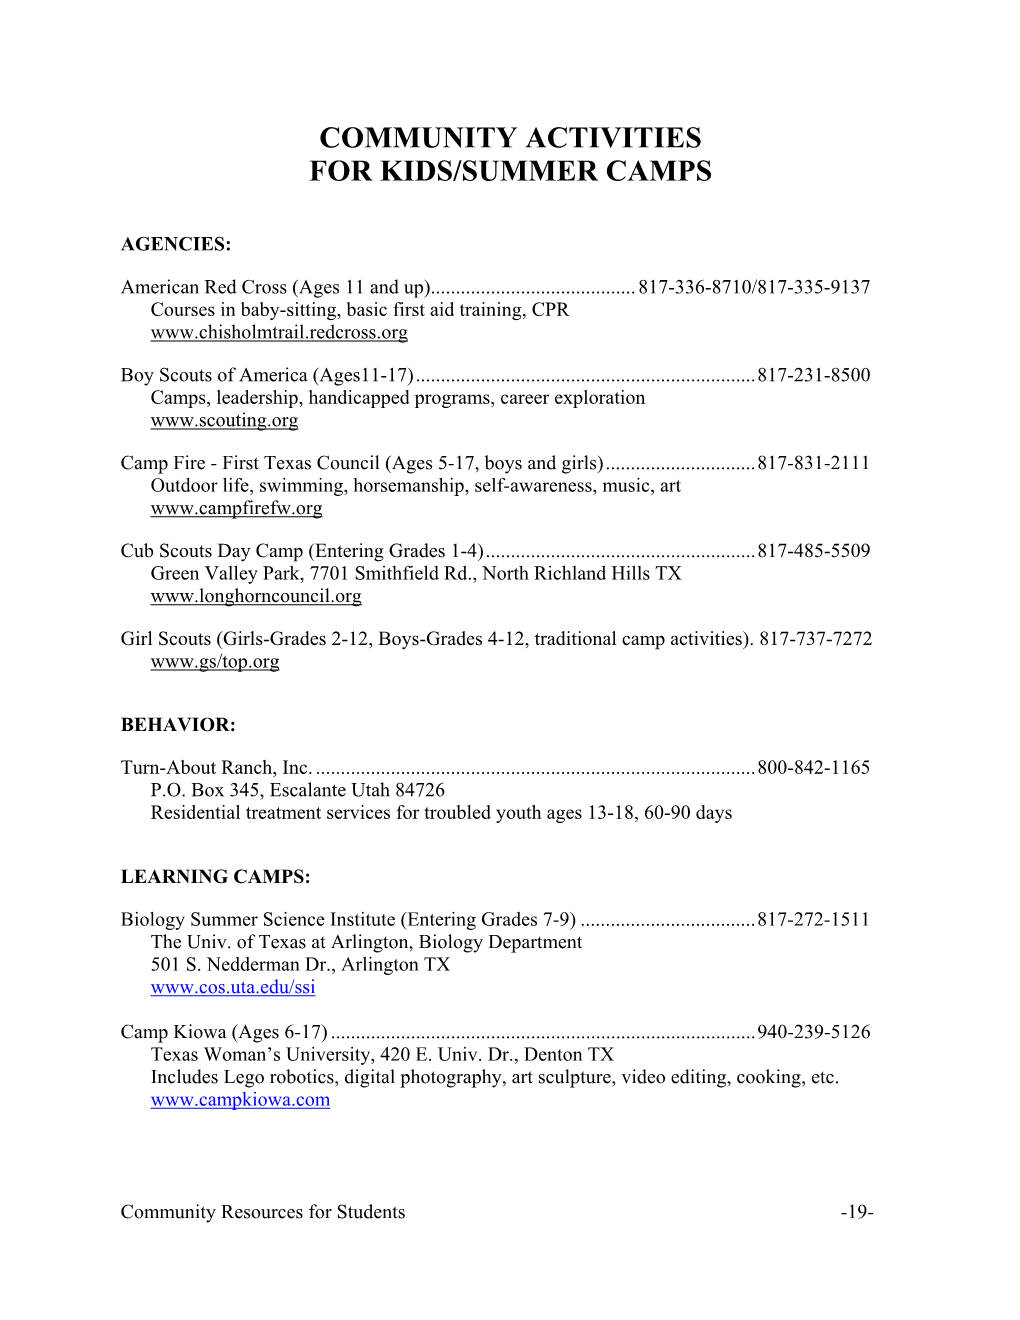 Community Activities for Kids/Summer Camps